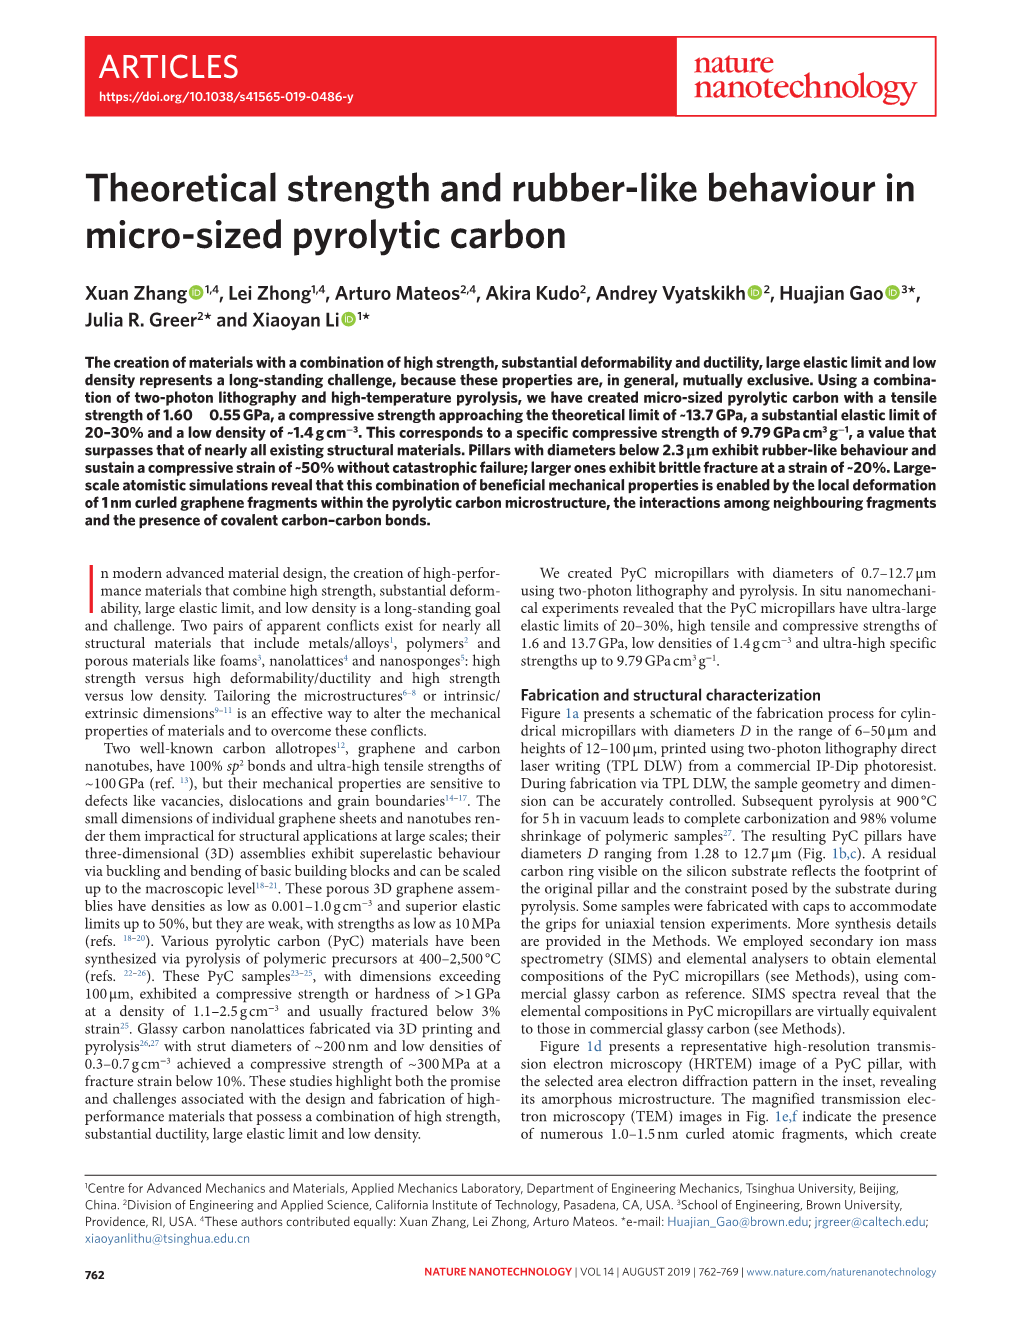 Theoretical Strength and Rubber-Like Behaviour in Micro-Sized Pyrolytic Carbon